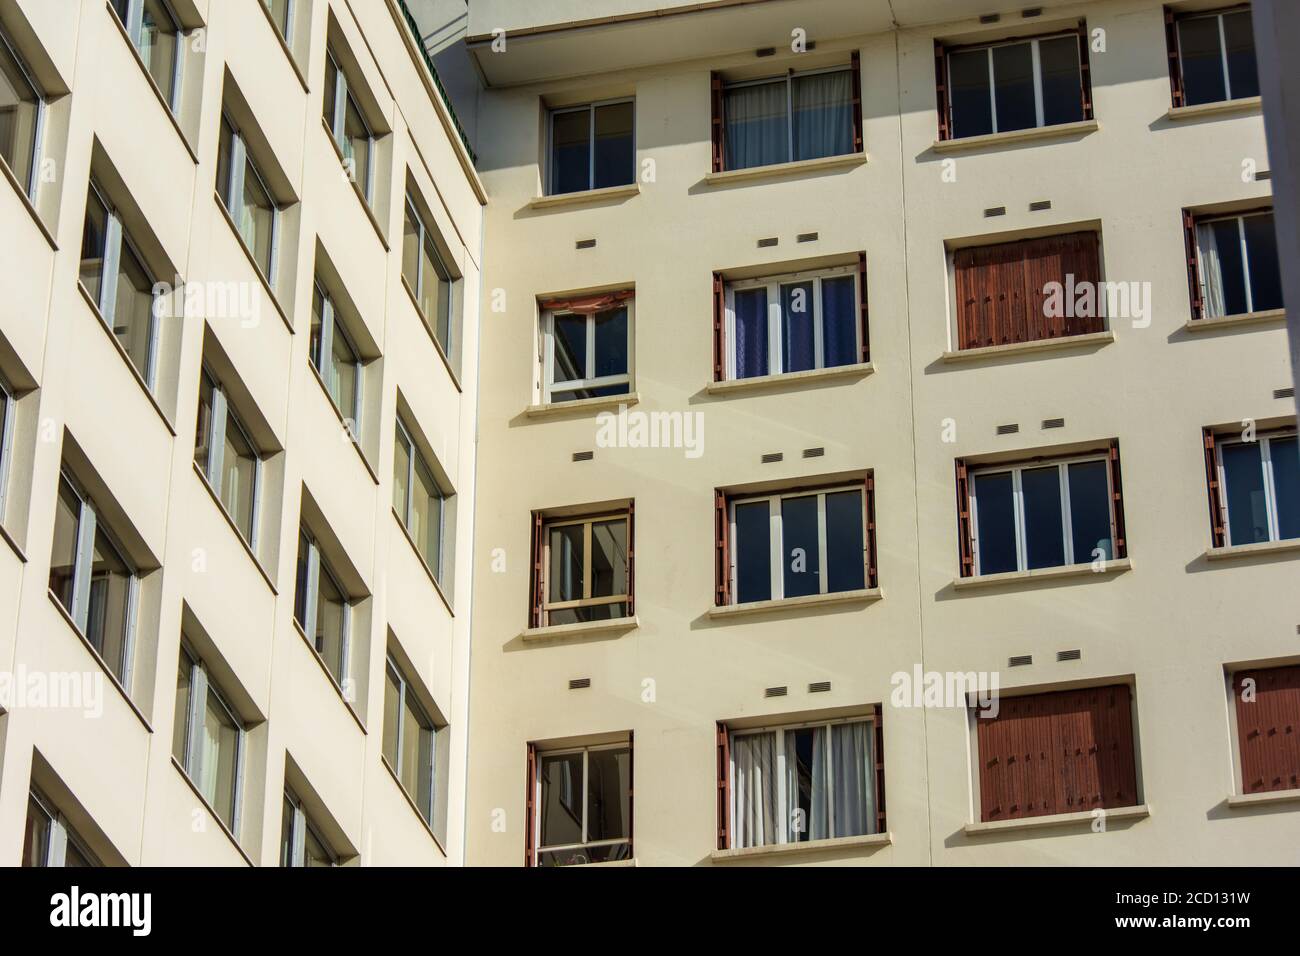 Real estate / housing market: exterior view of residential buildings with many apartment windows Stock Photo